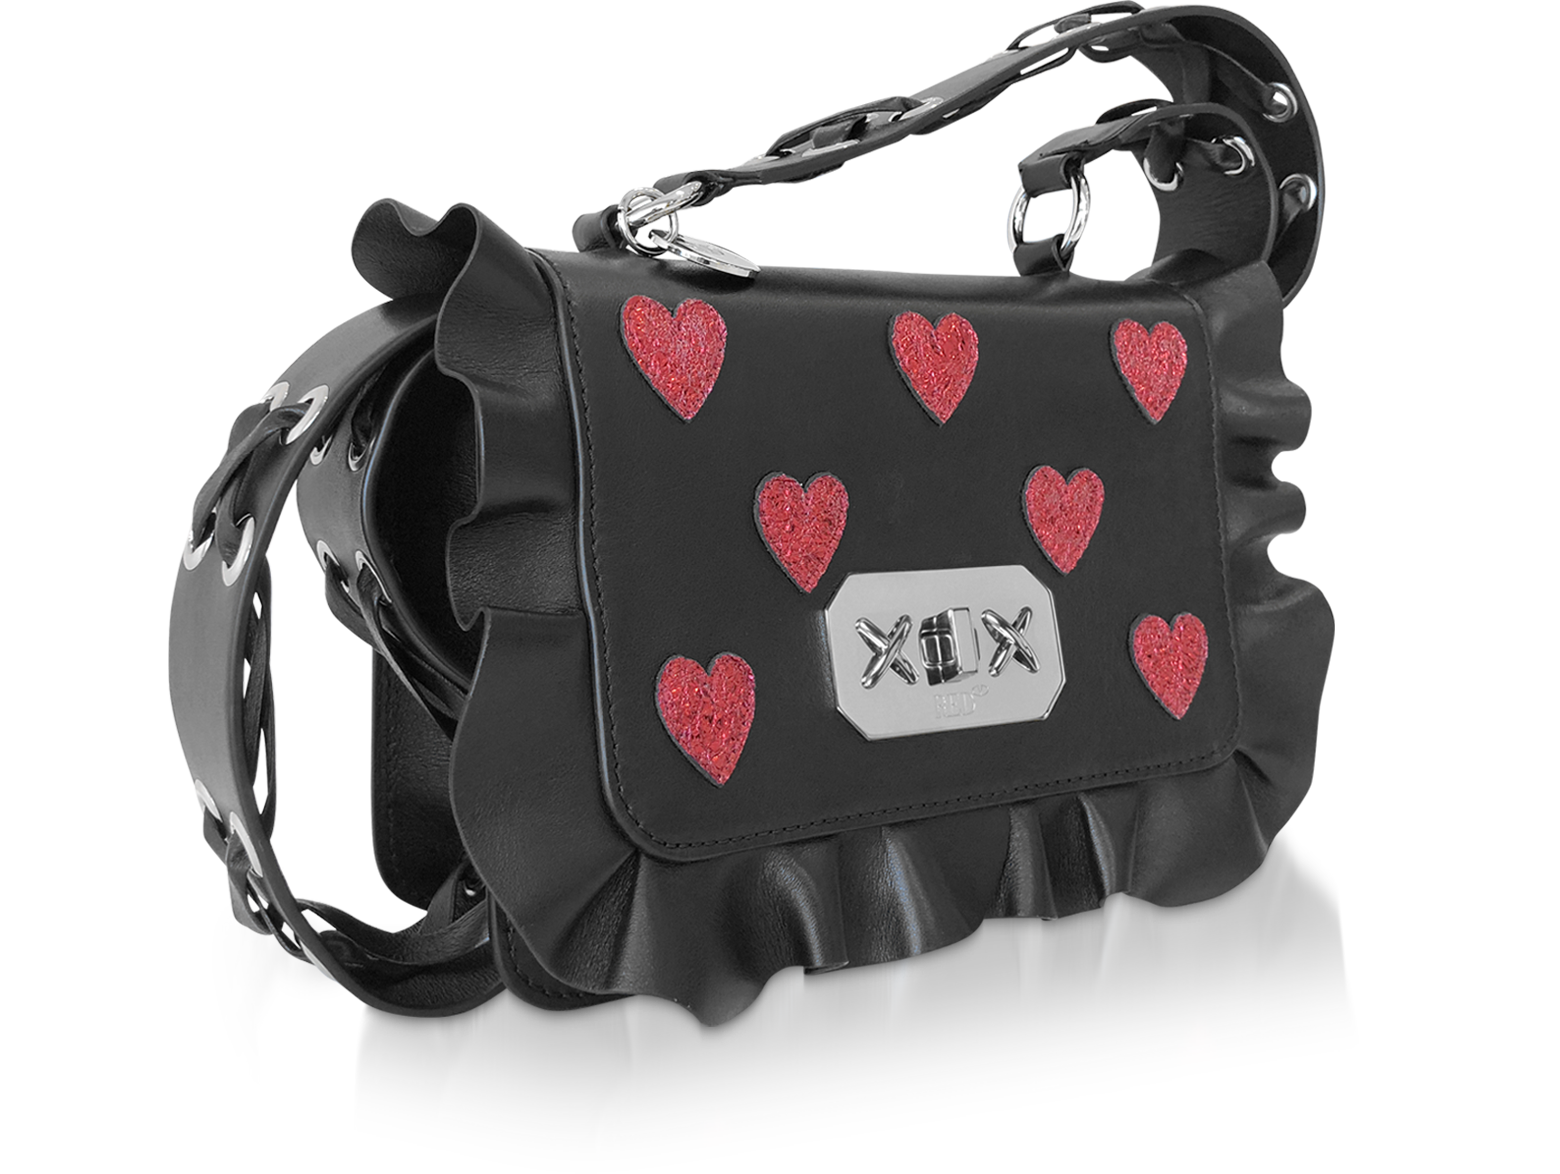 RED Valentino Black Butterfly Print Leather Crossbody Bag at FORZIERI